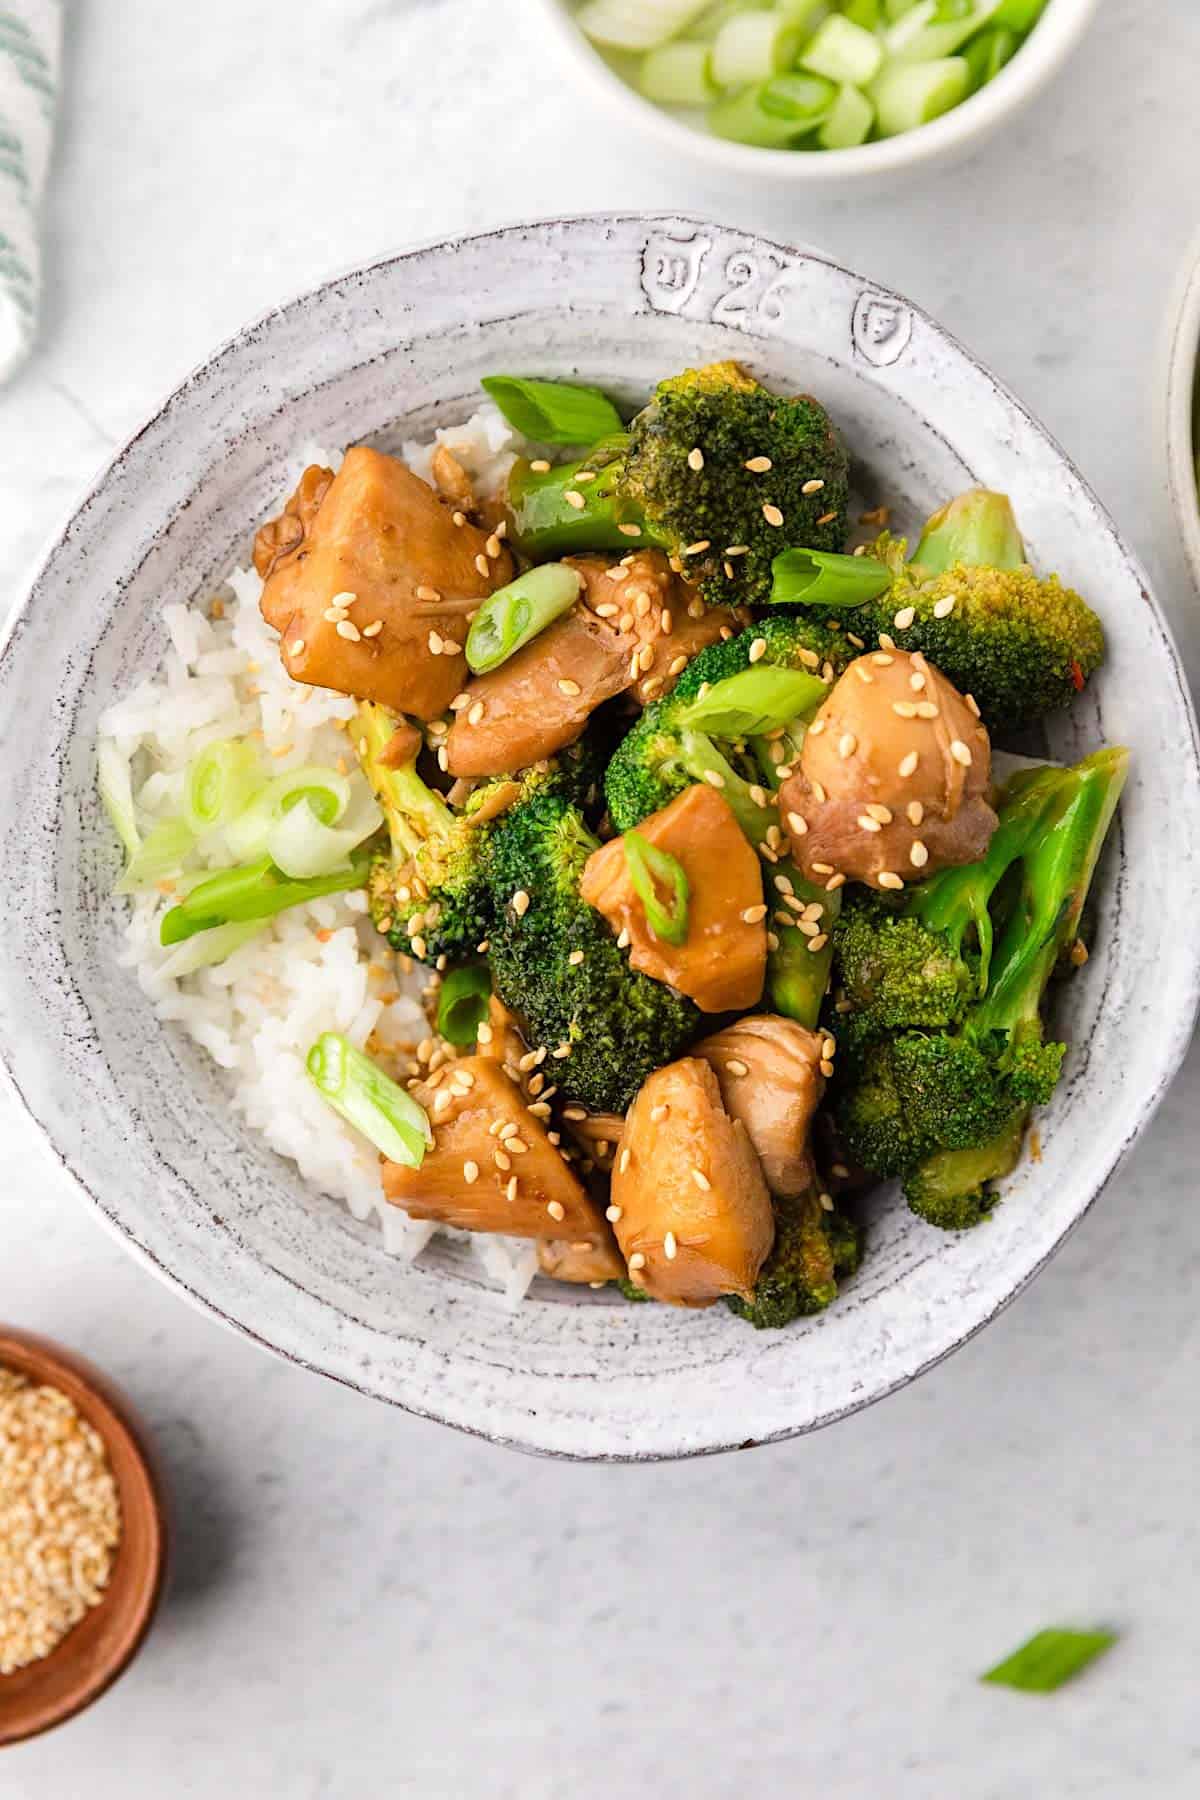 https://www.thetravelpalate.com/wp-content/uploads/2023/01/instant-pot-chicken-and-broccoli-11.jpg